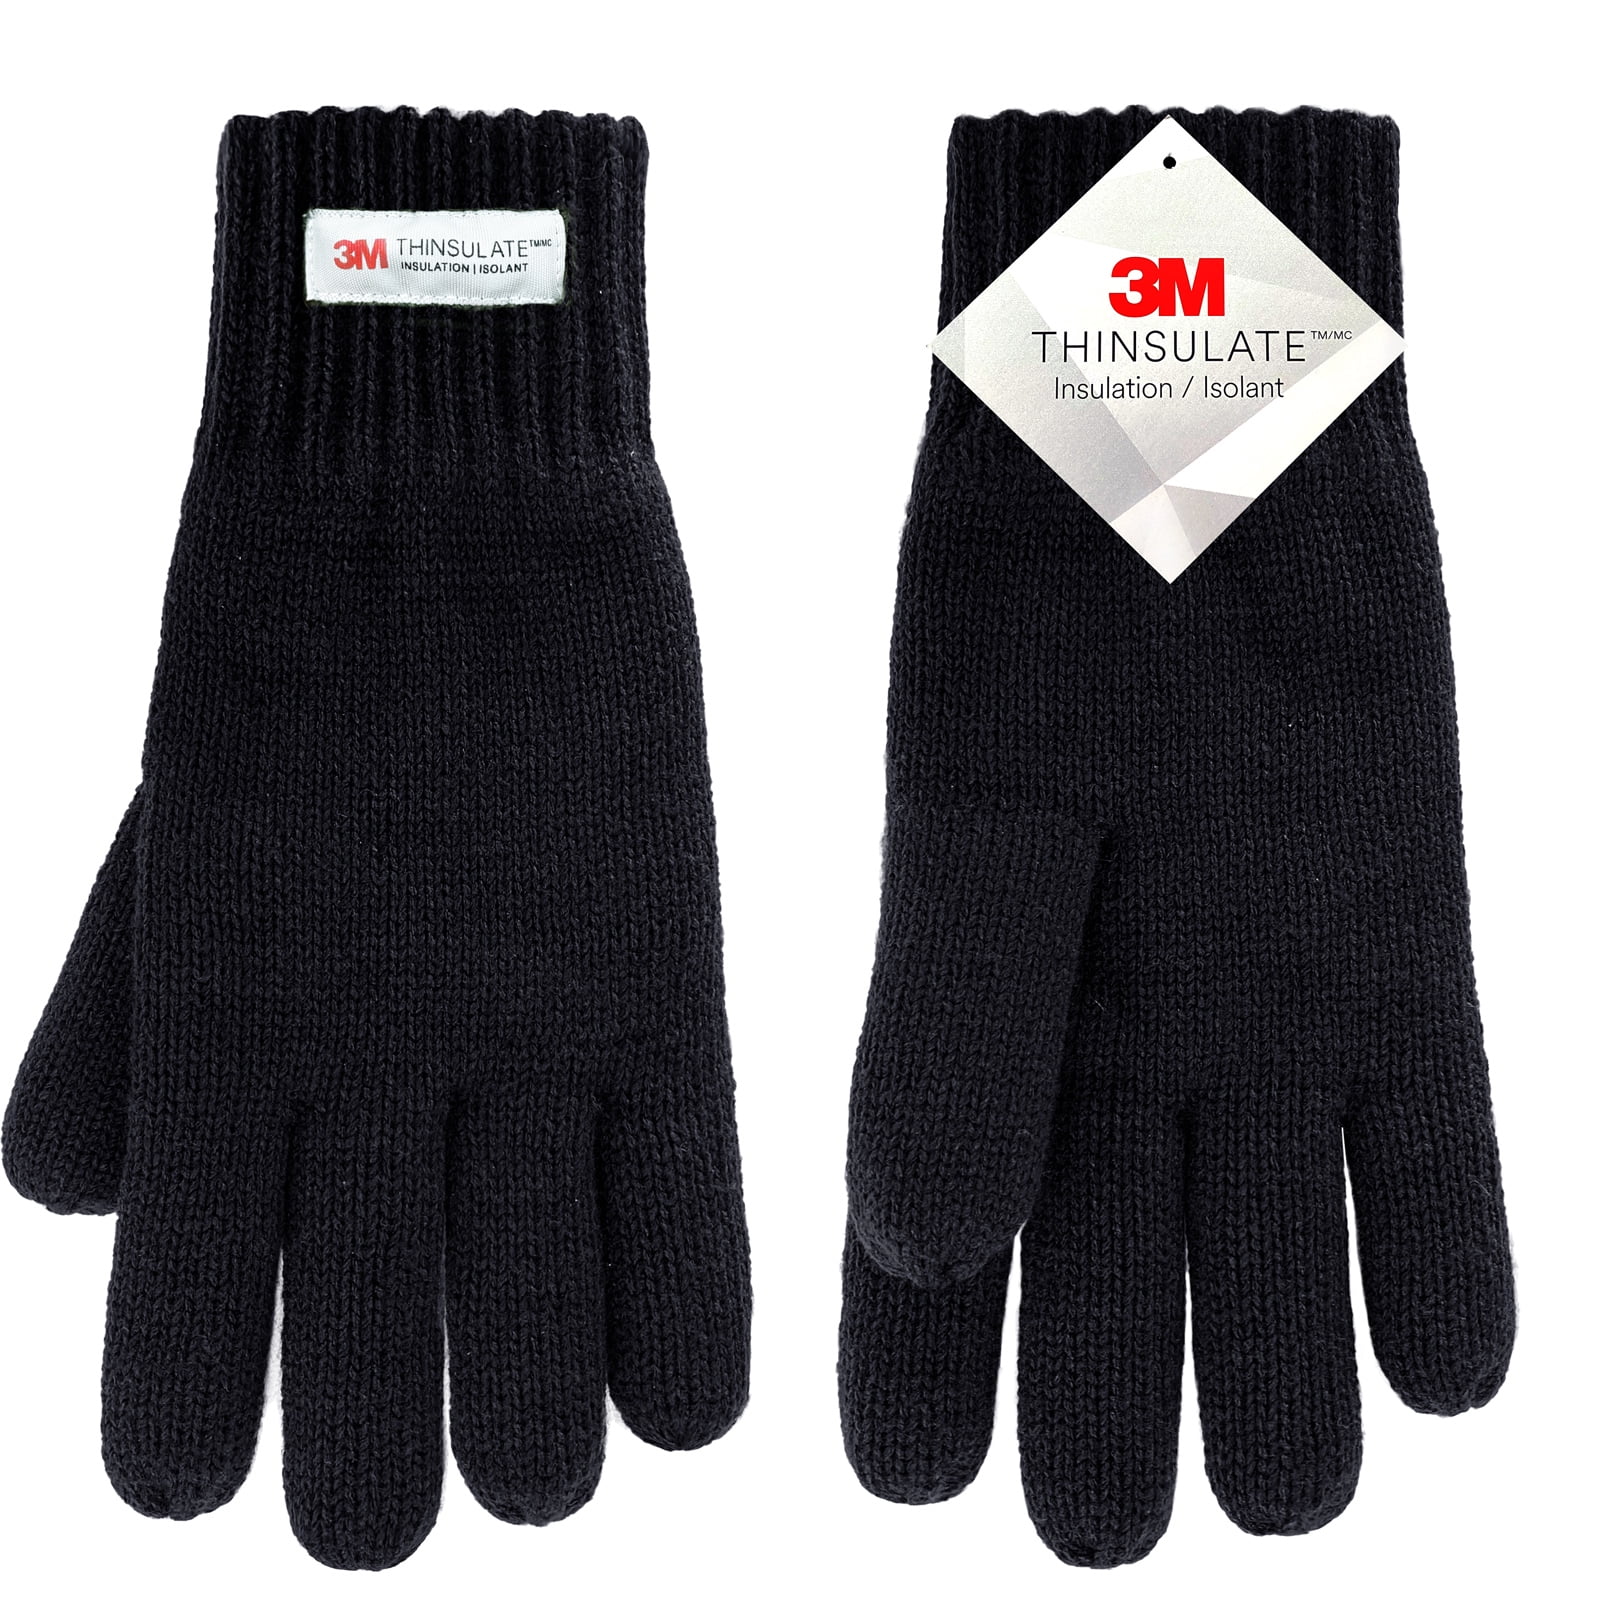 Mens Black Super Soft Warm Thinsulate Knit Thermal Fingerless Winter Gloves 